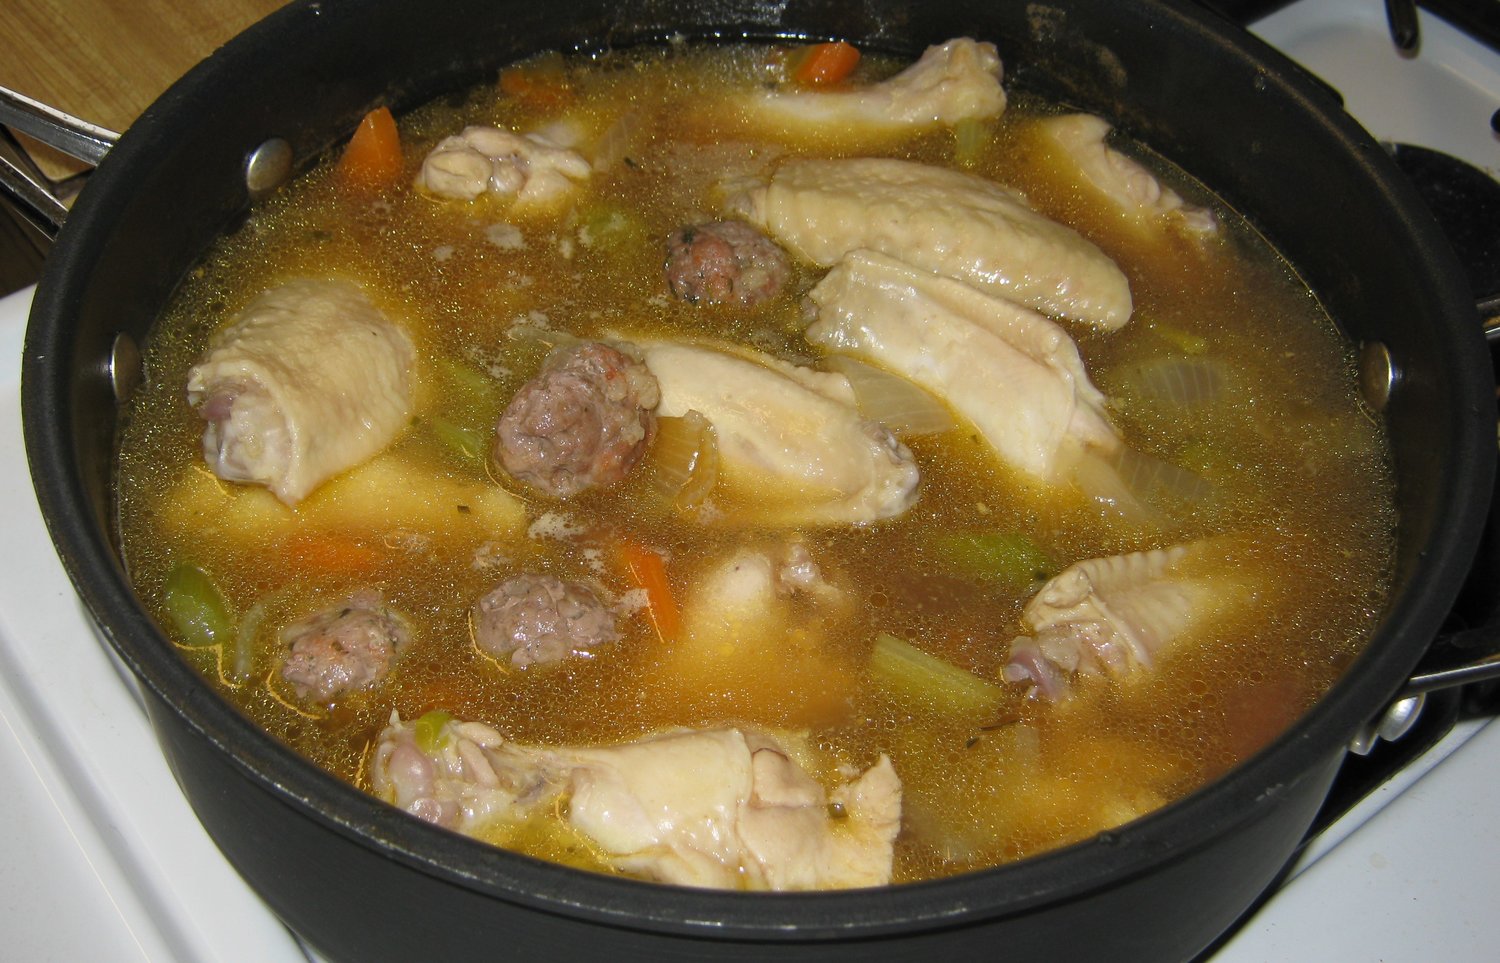 Chicken fricassee with tiny meatballs.